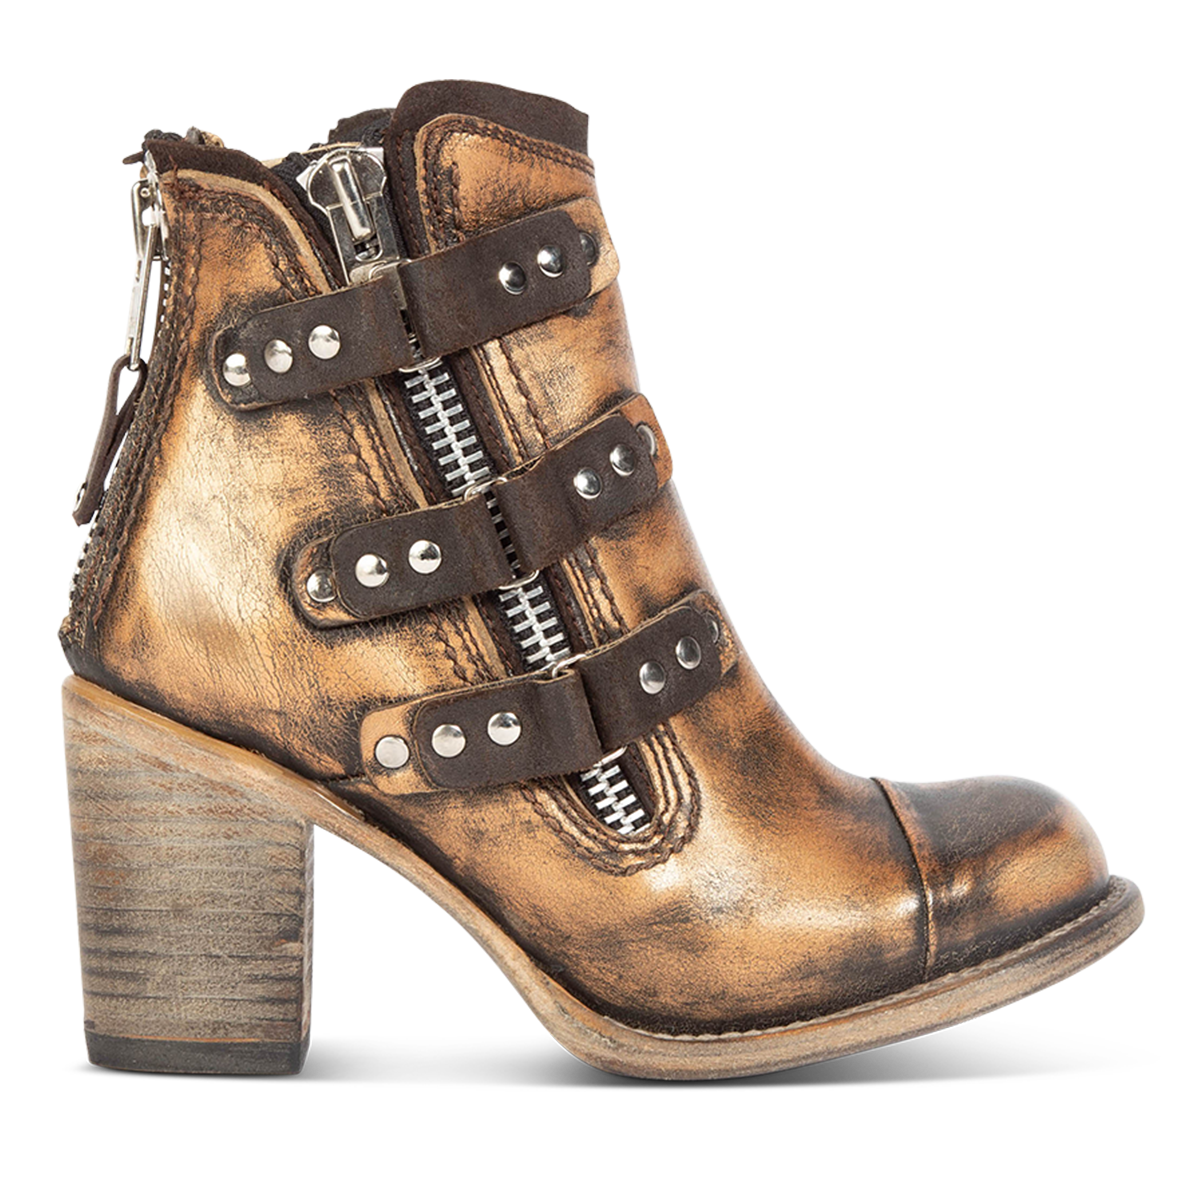 FREEBIRD women's Beckett bronze full grain leather bootie with inside zip closure, stacked heel, and embellished leather overlays